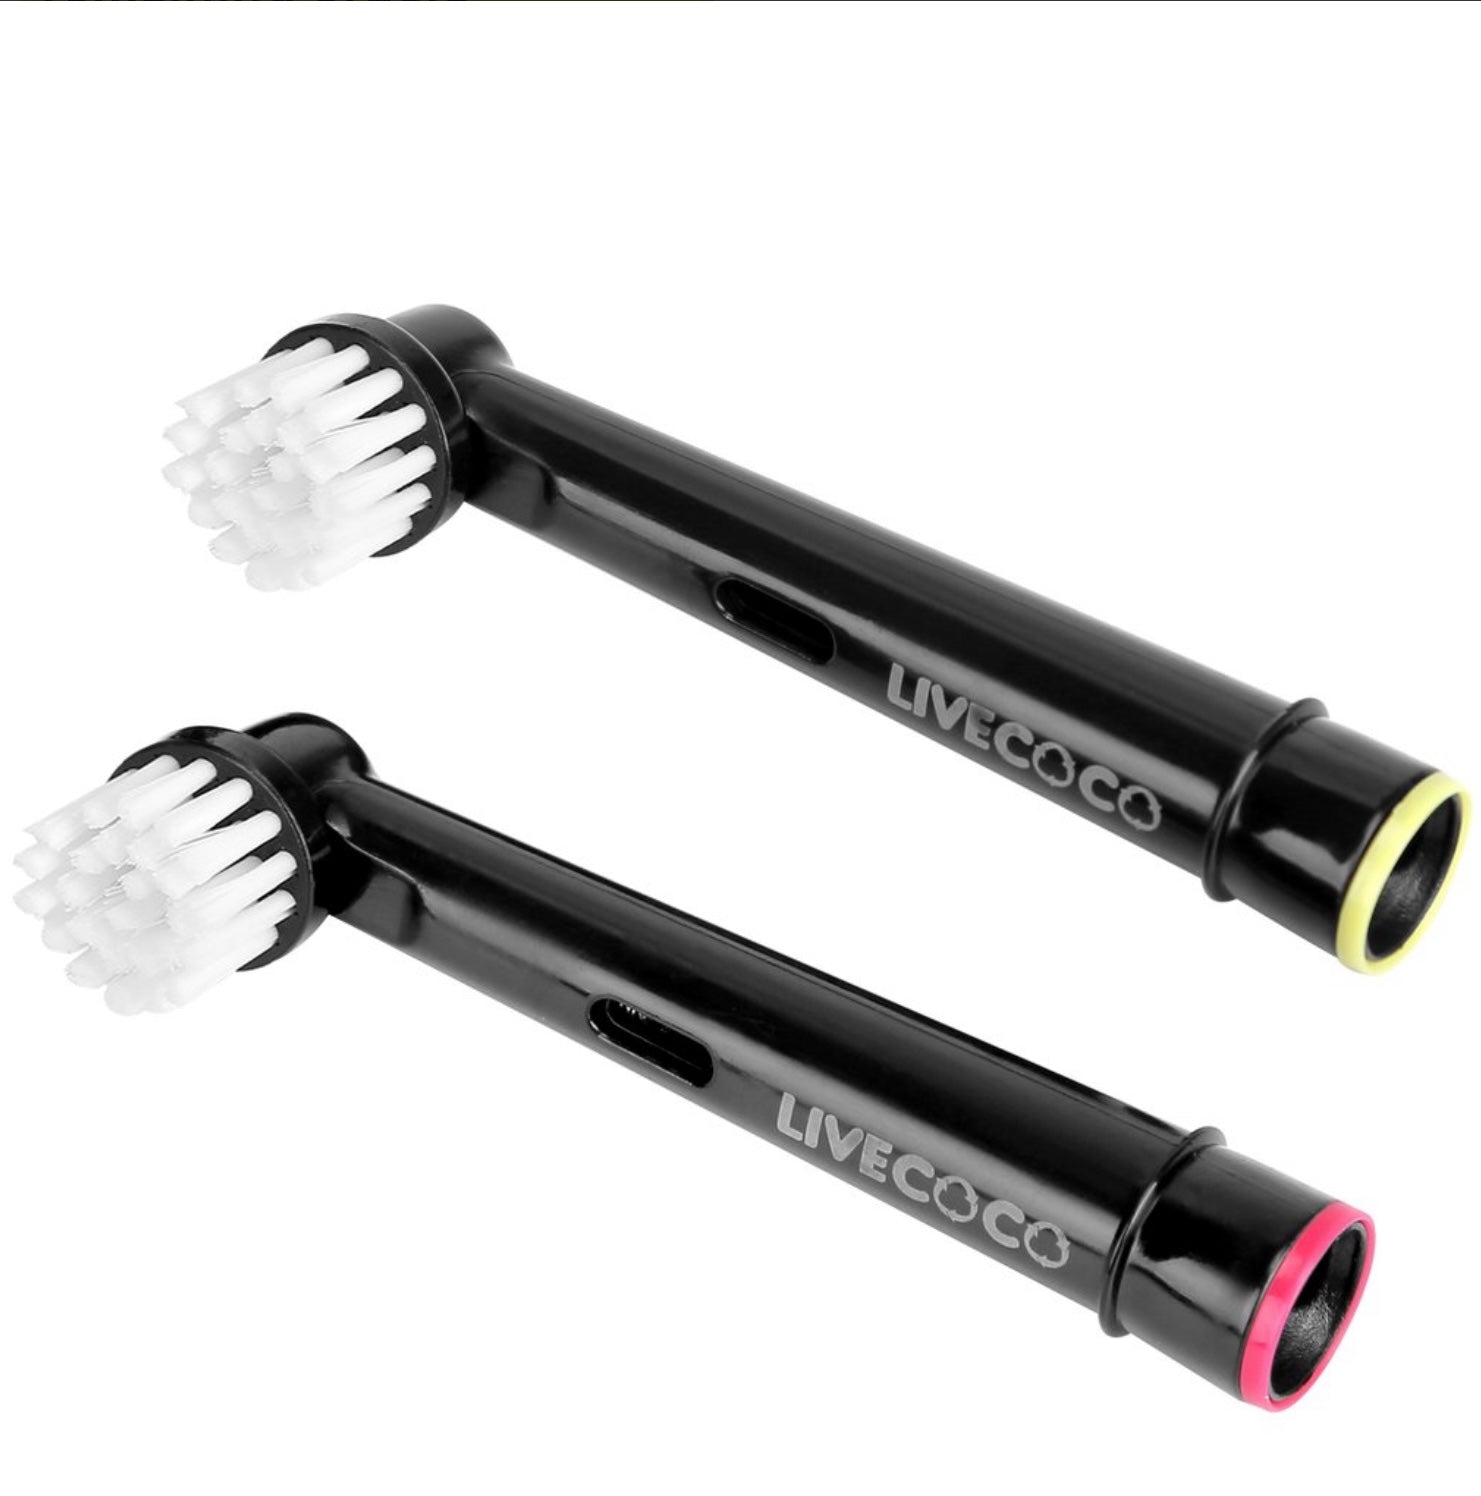 Livecoco Recyclable Electric Toothbrush Heads